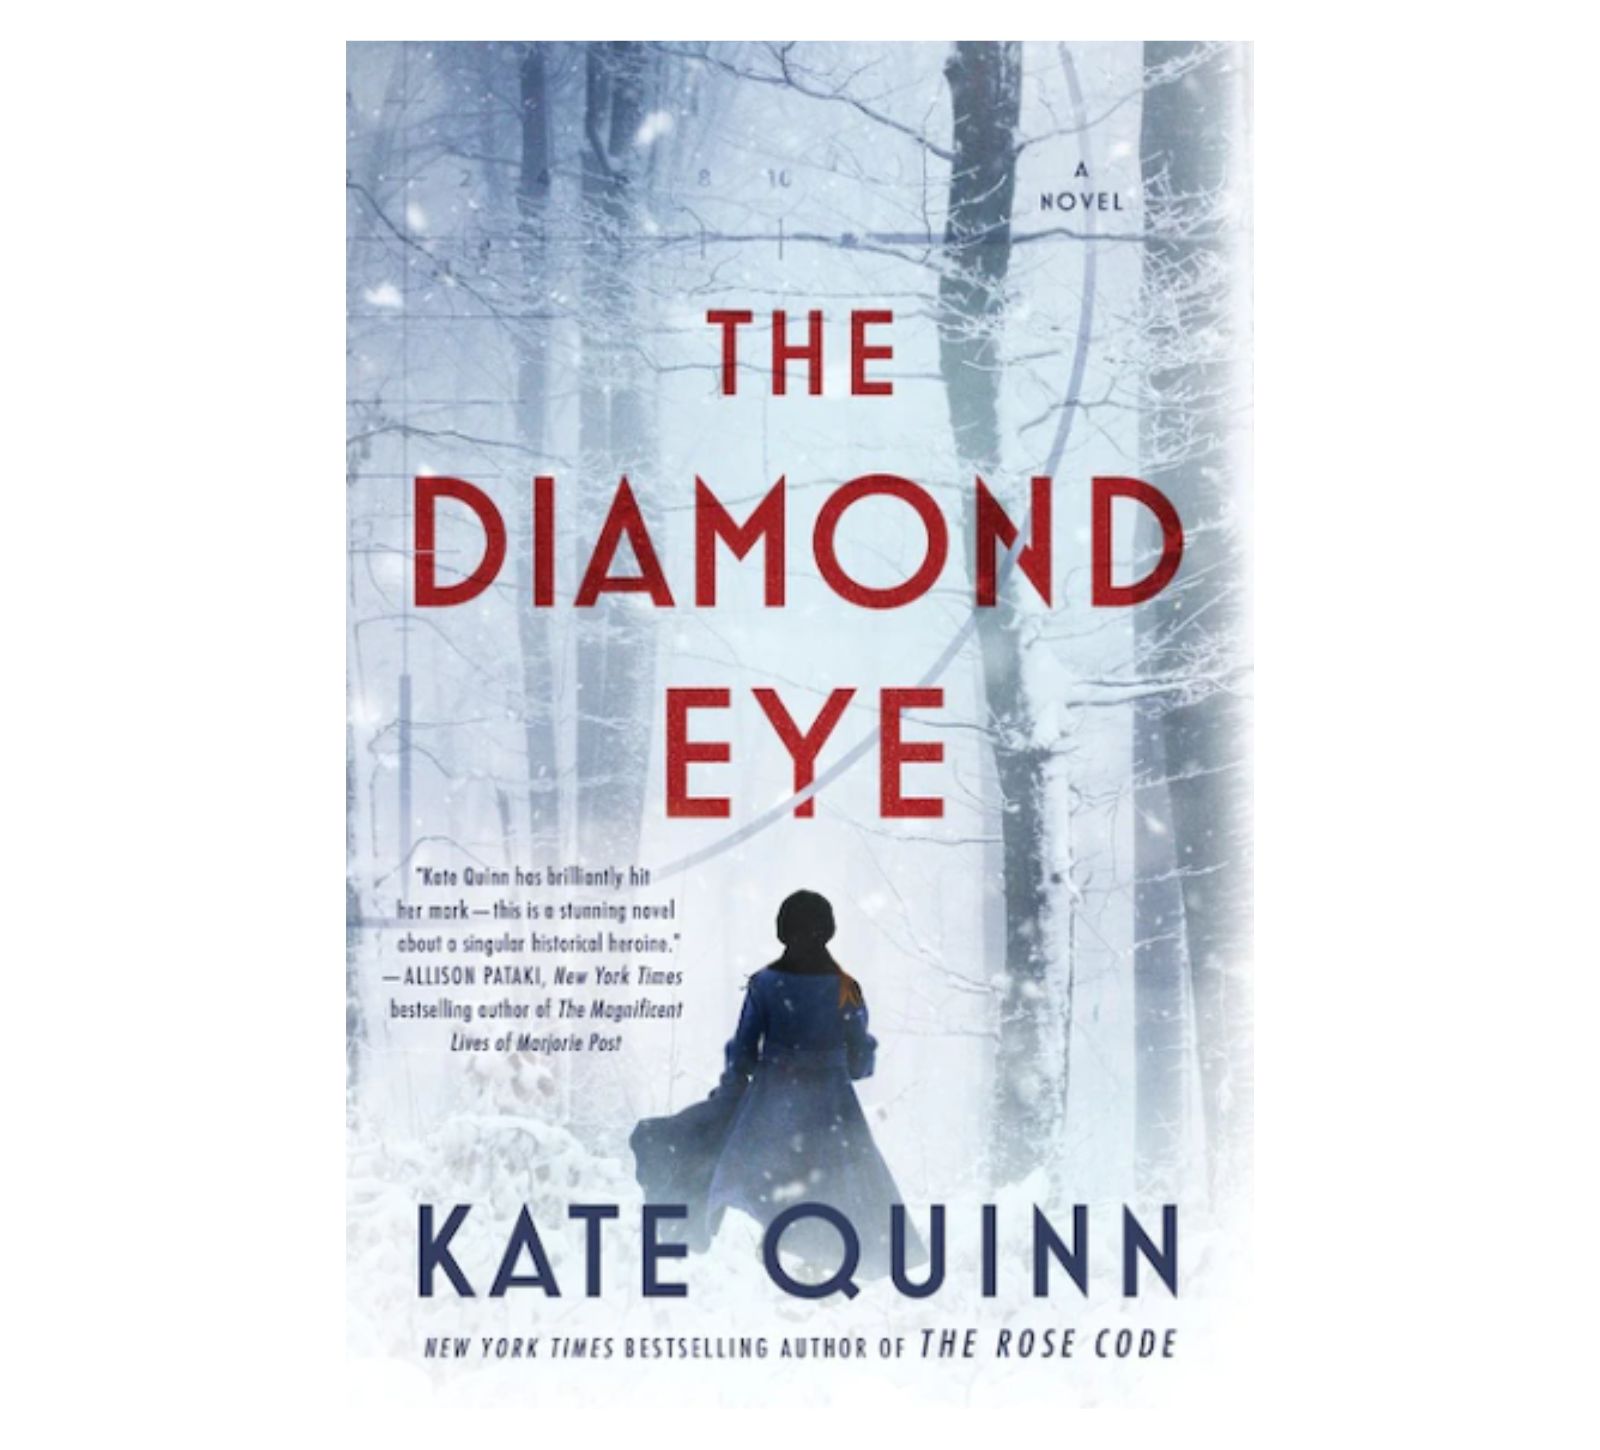 Kitchen Table CEOs Blog - Must-Read Books fro Summer 2022 - Cover of Diamond Eye Book by Kate Quinn - person walking away in the snowy mist